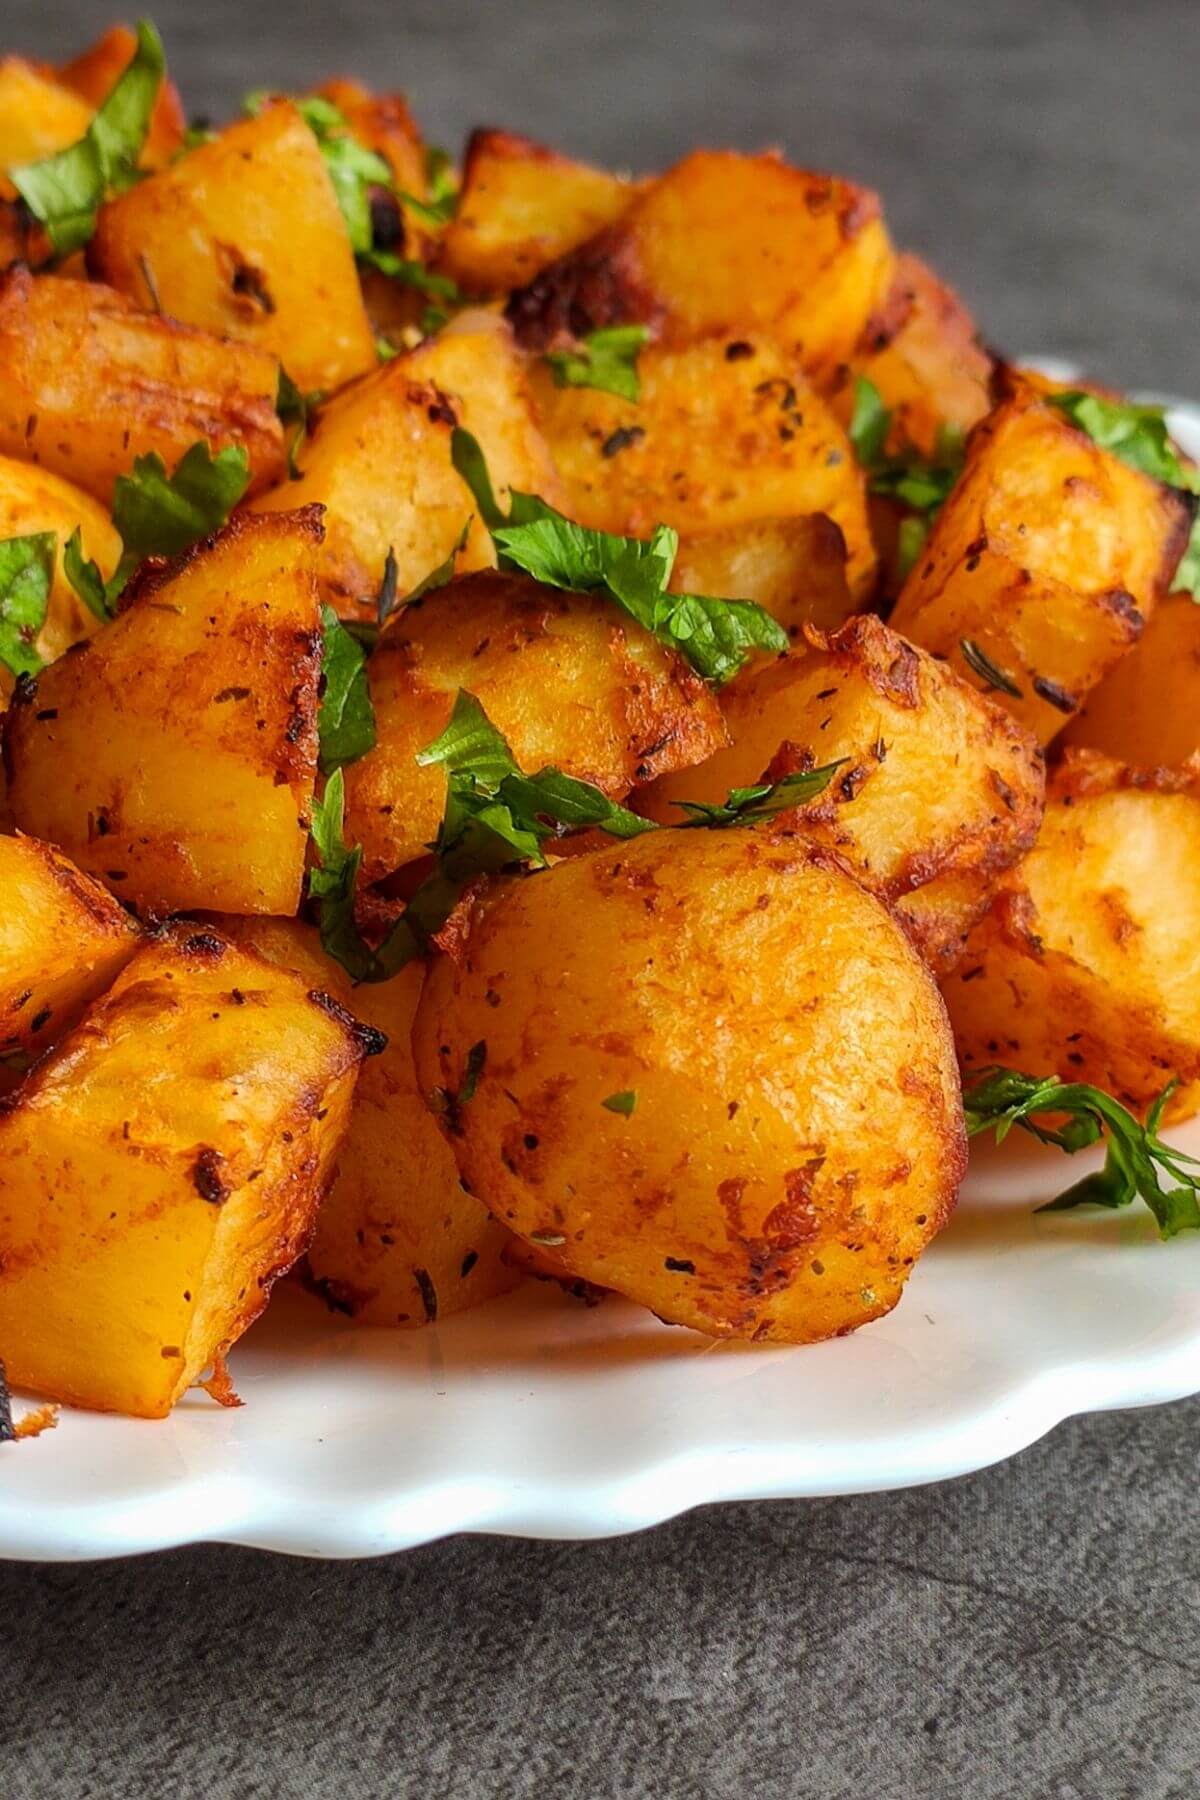 Roasted Spanish potatoes served on a white plate